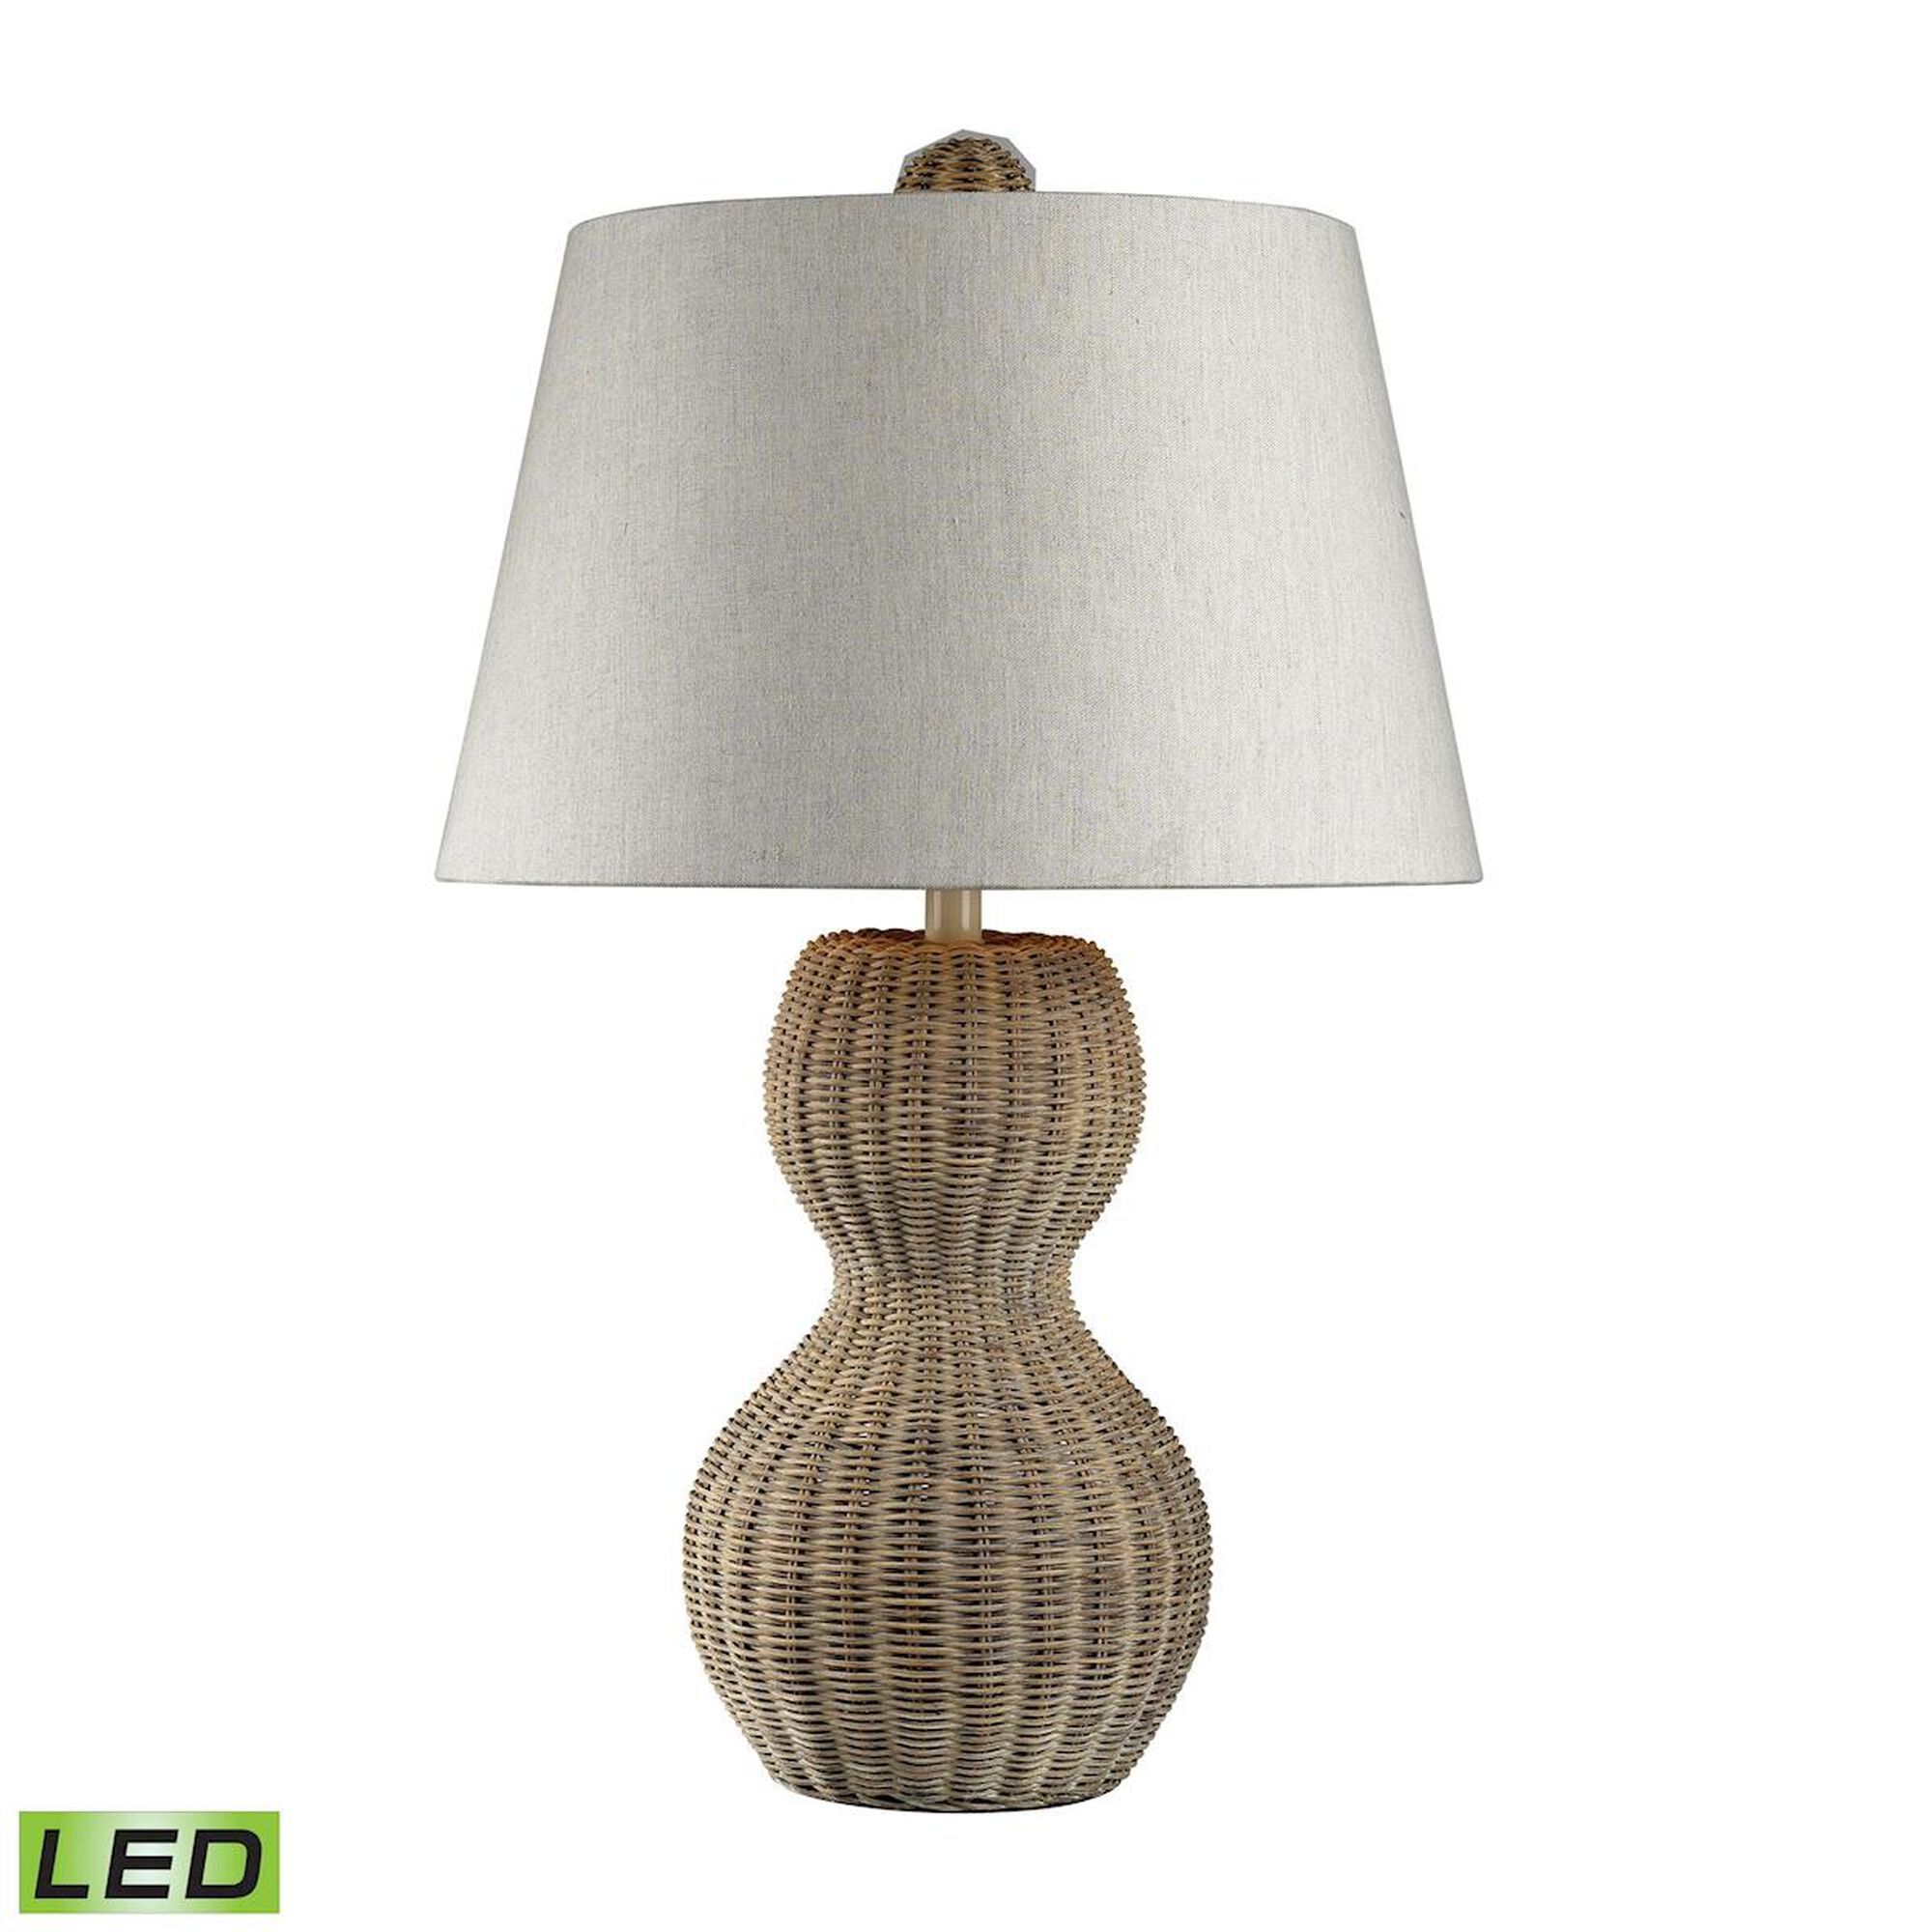 Sycamore Hill 26 Inch Table Lamp by Dimond Lighting | Capitol Lighting 1800lighting.com